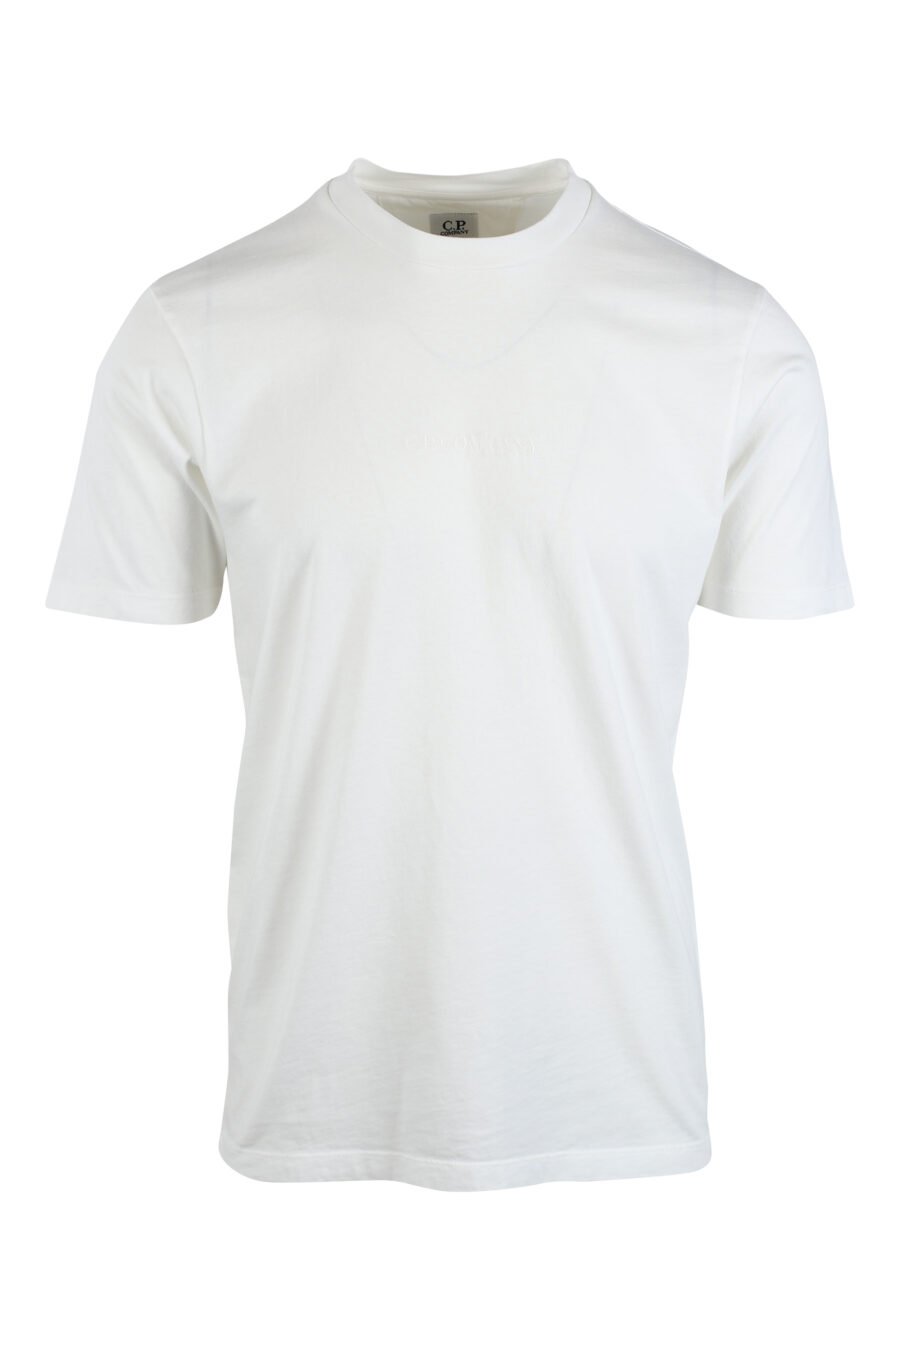 White T-shirt with central embroidered mini logo and graphic print on the back - IMG 2621